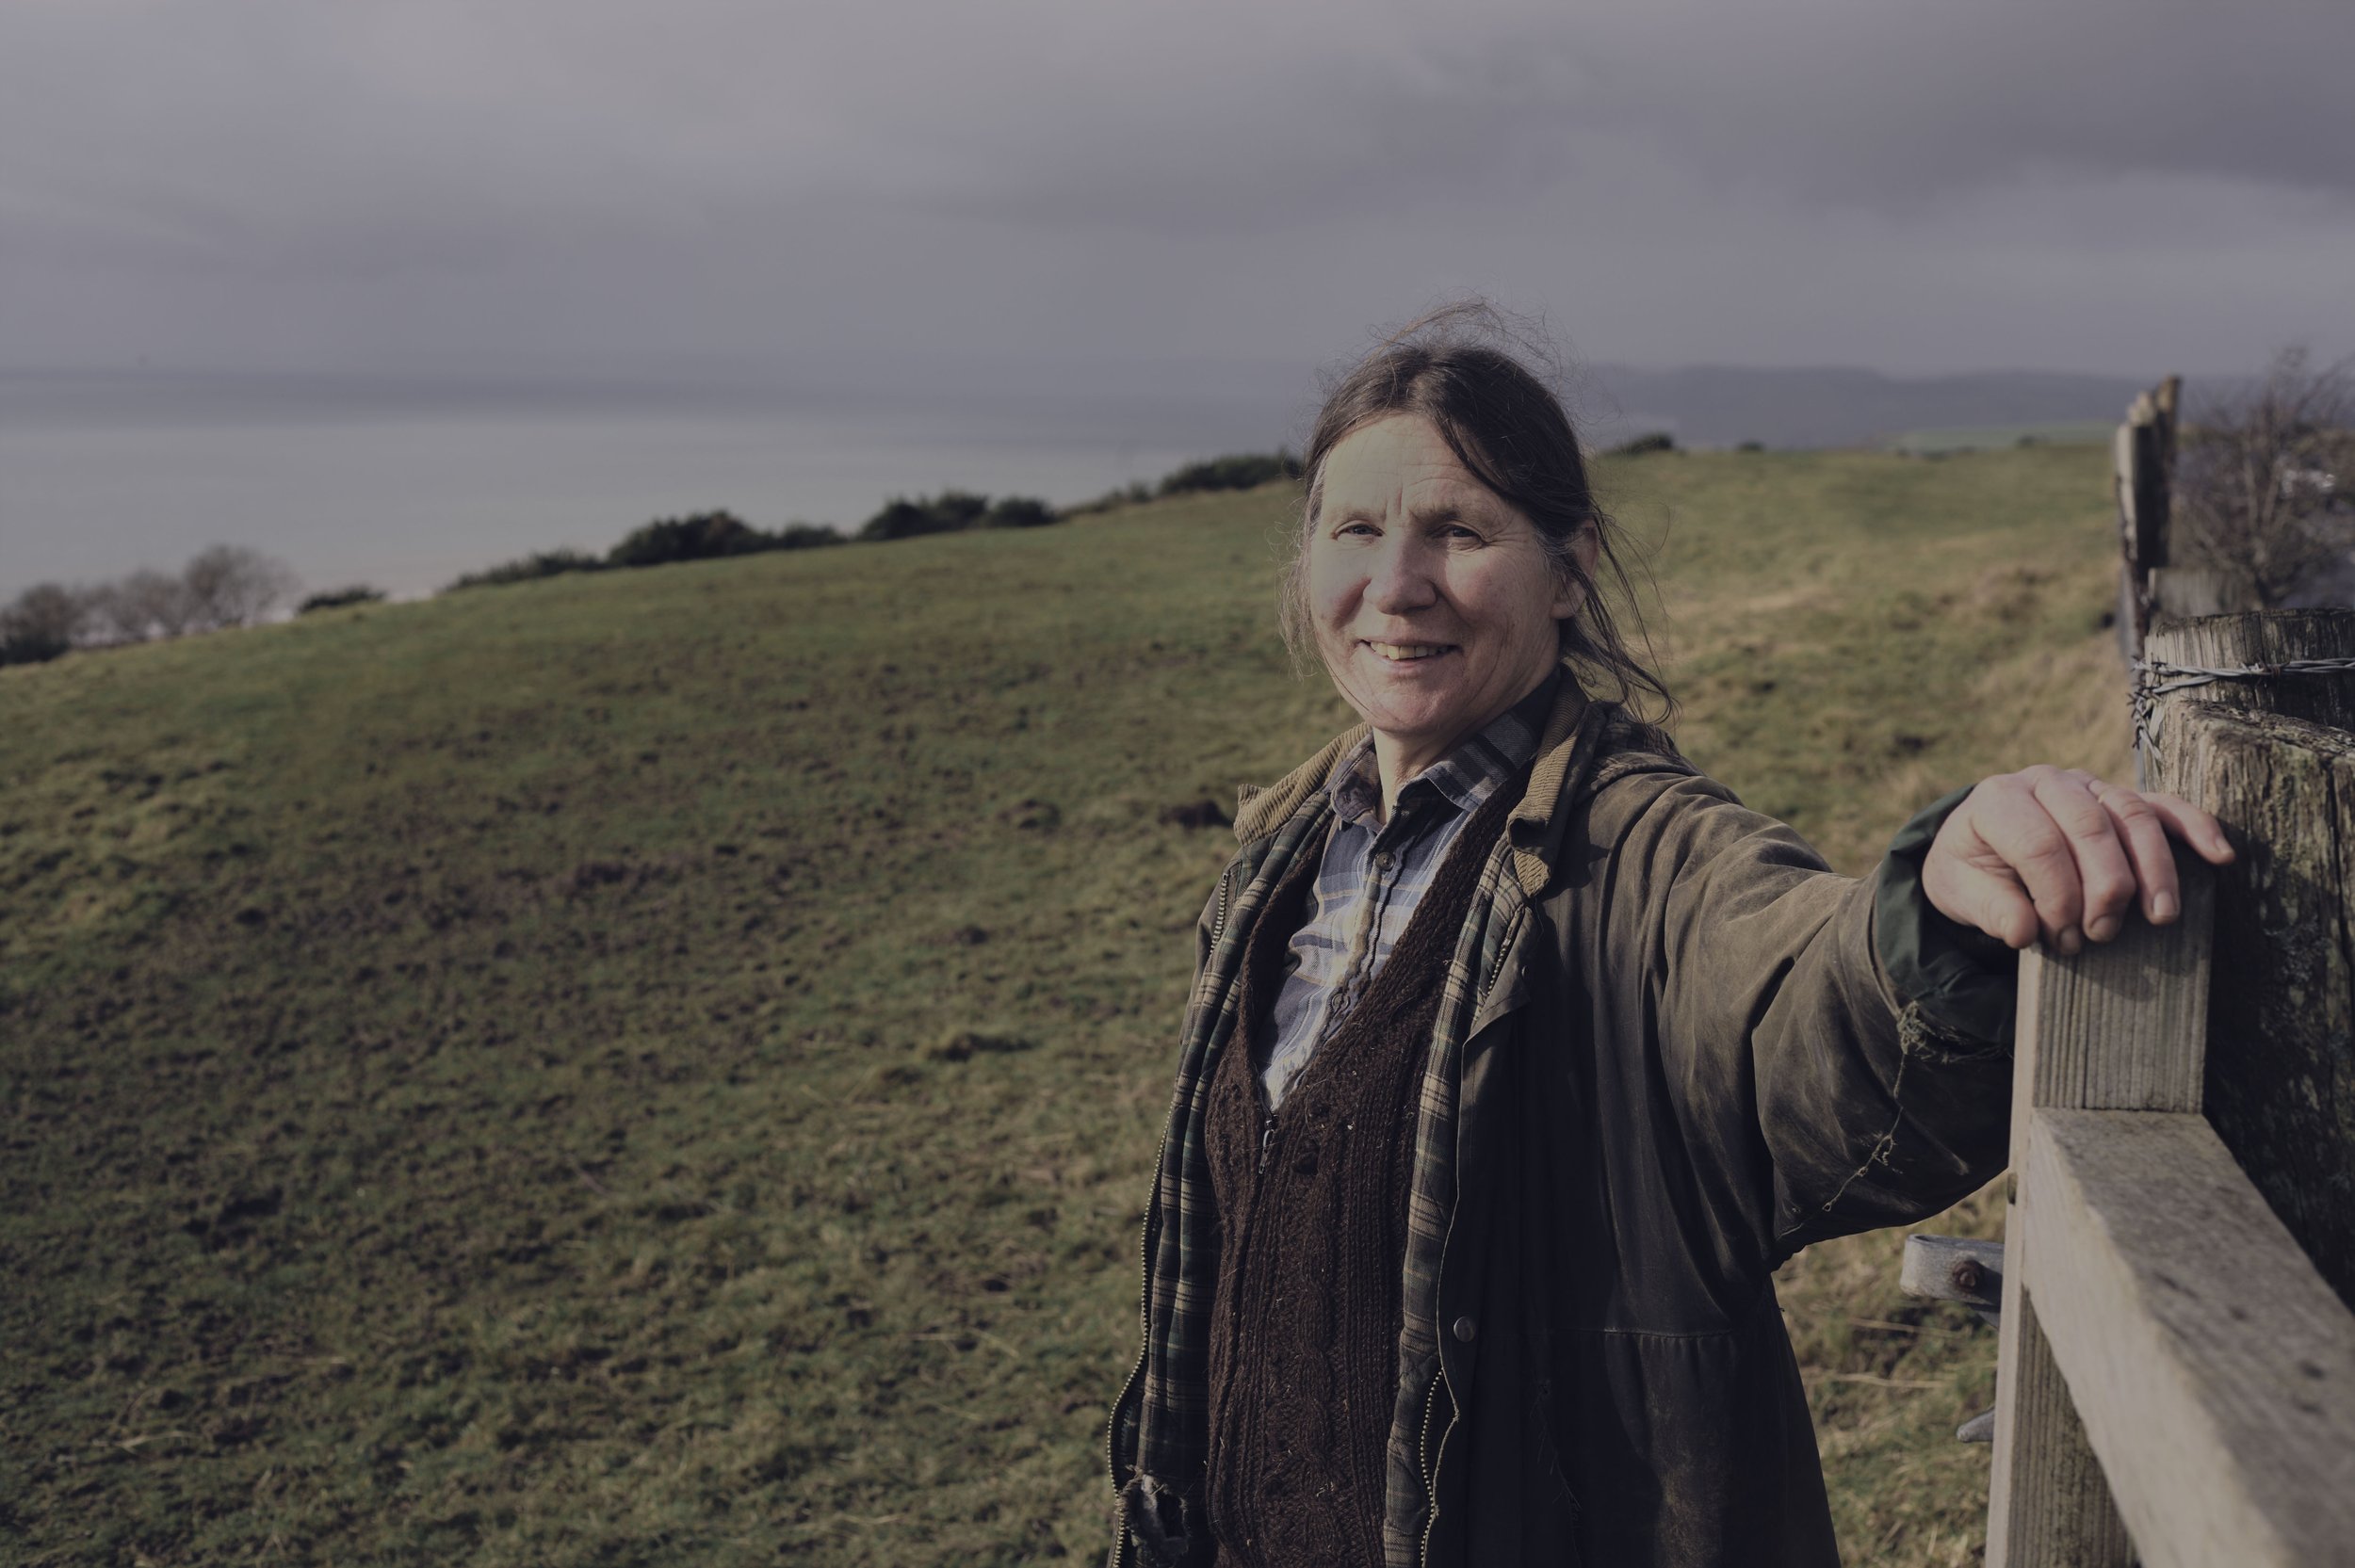  Second-generation farmer Ellen and her family produce grass-fed organic beef and lamb, free-range eggs from pastured chickens, grains and stoneground flours, as well as yarns and sheepskins from their mixed flock of sheep. 